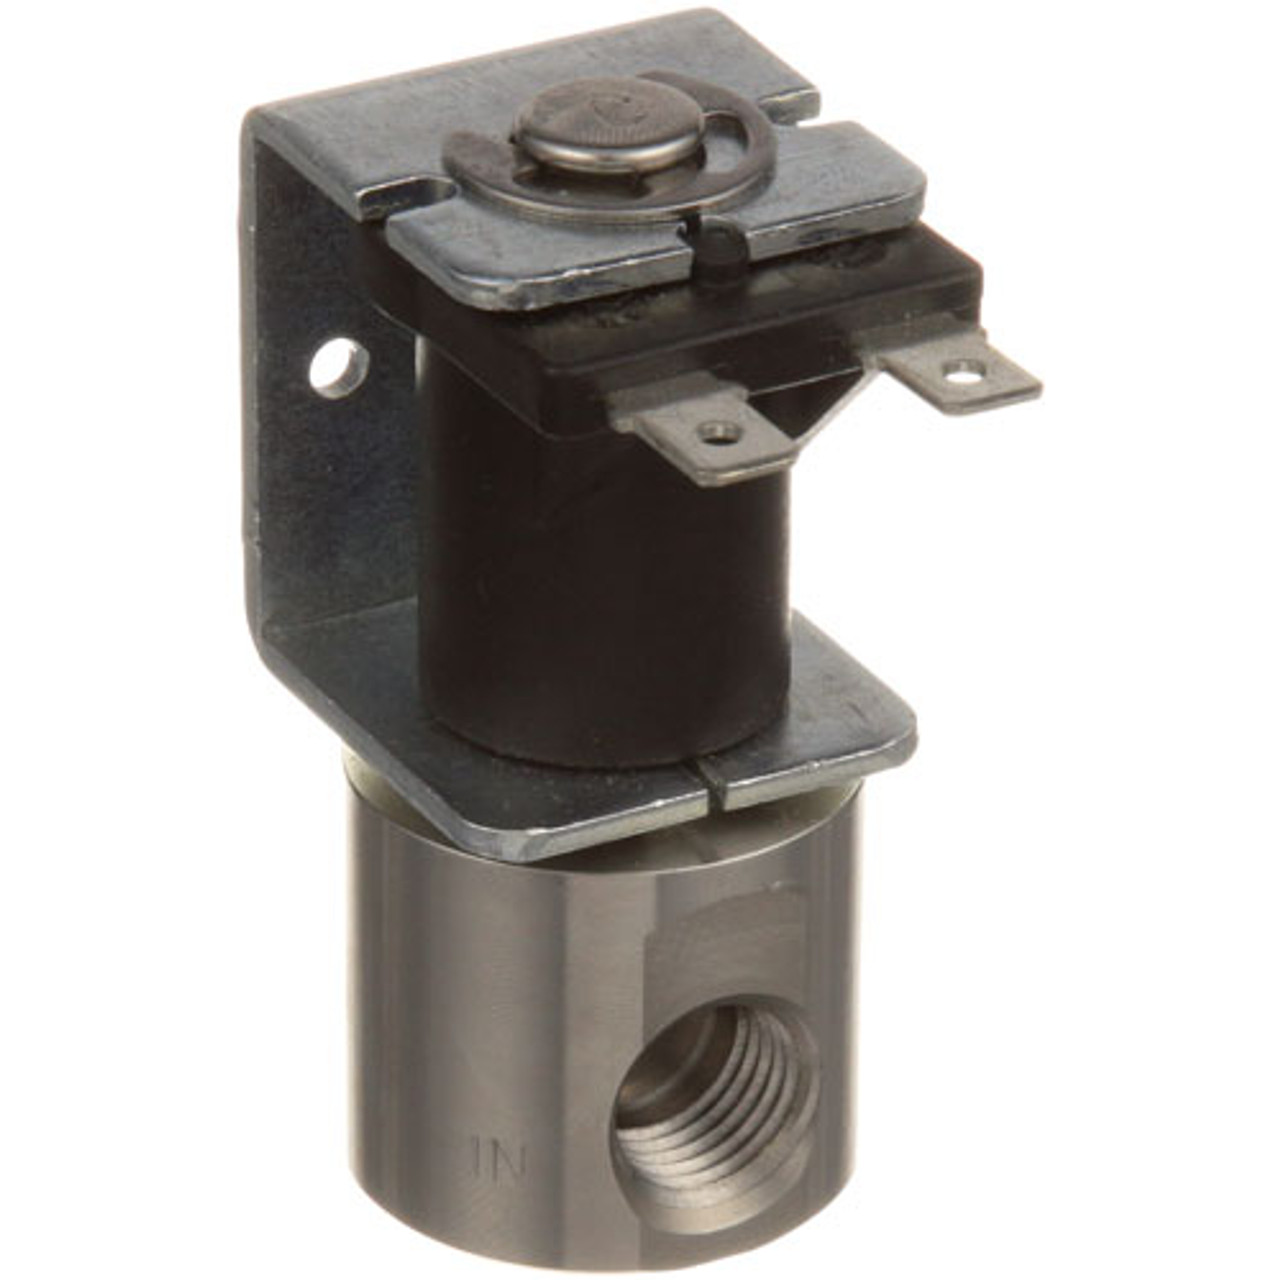 Solenoid Valve 1/4" 120V - Replacement Part For Cecilware L321F